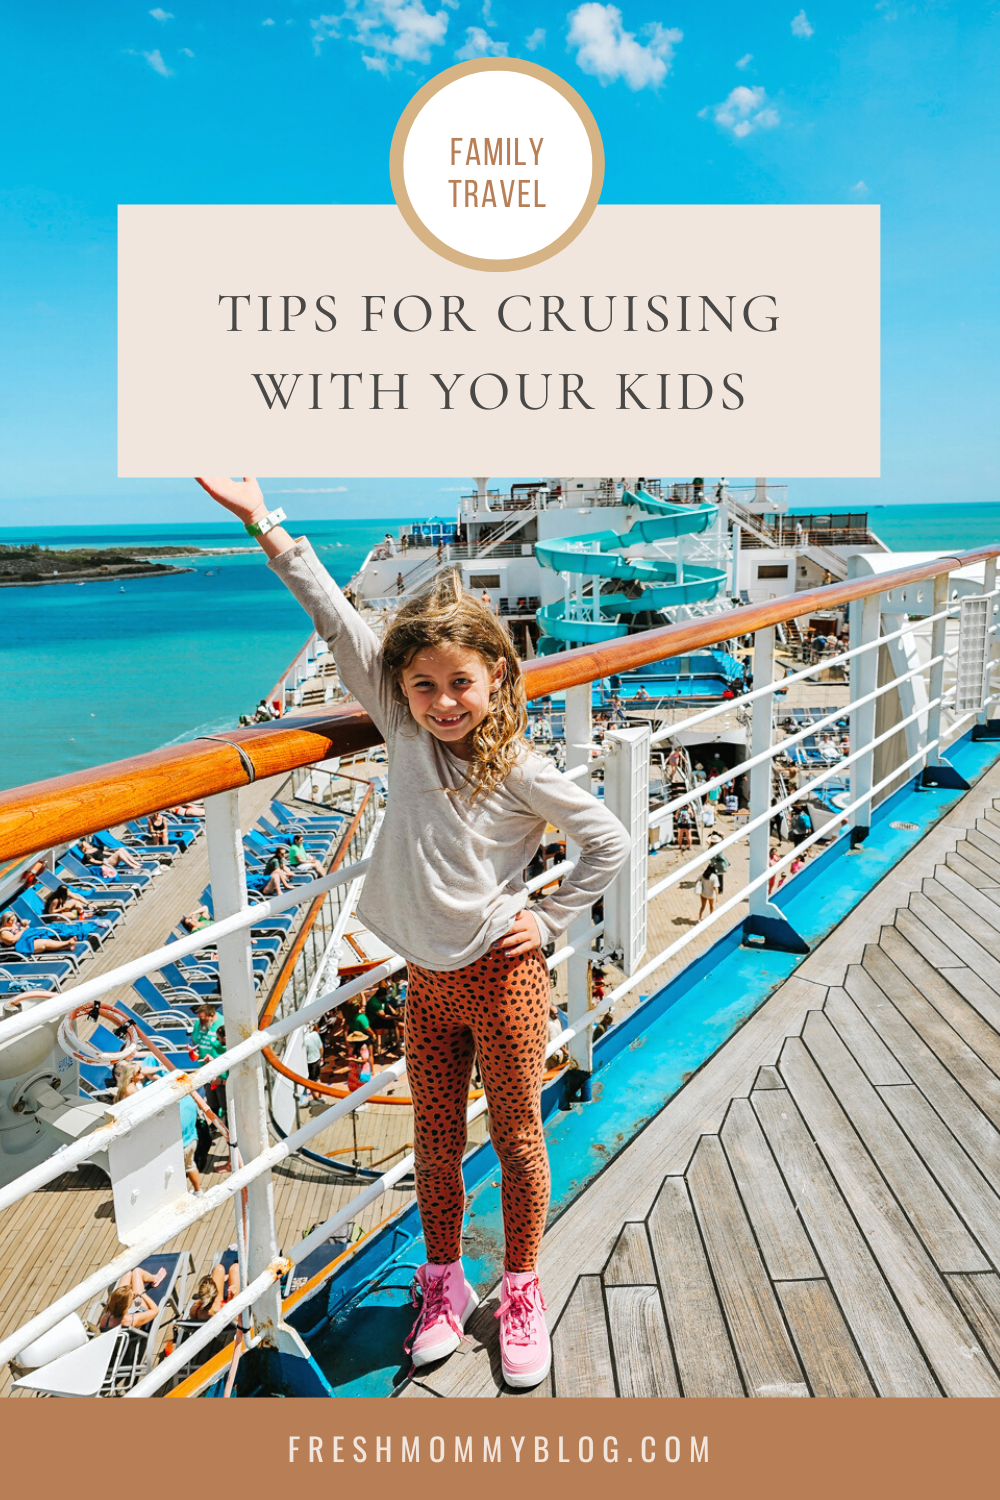 Family Travel - Tips for cruising with your kids.